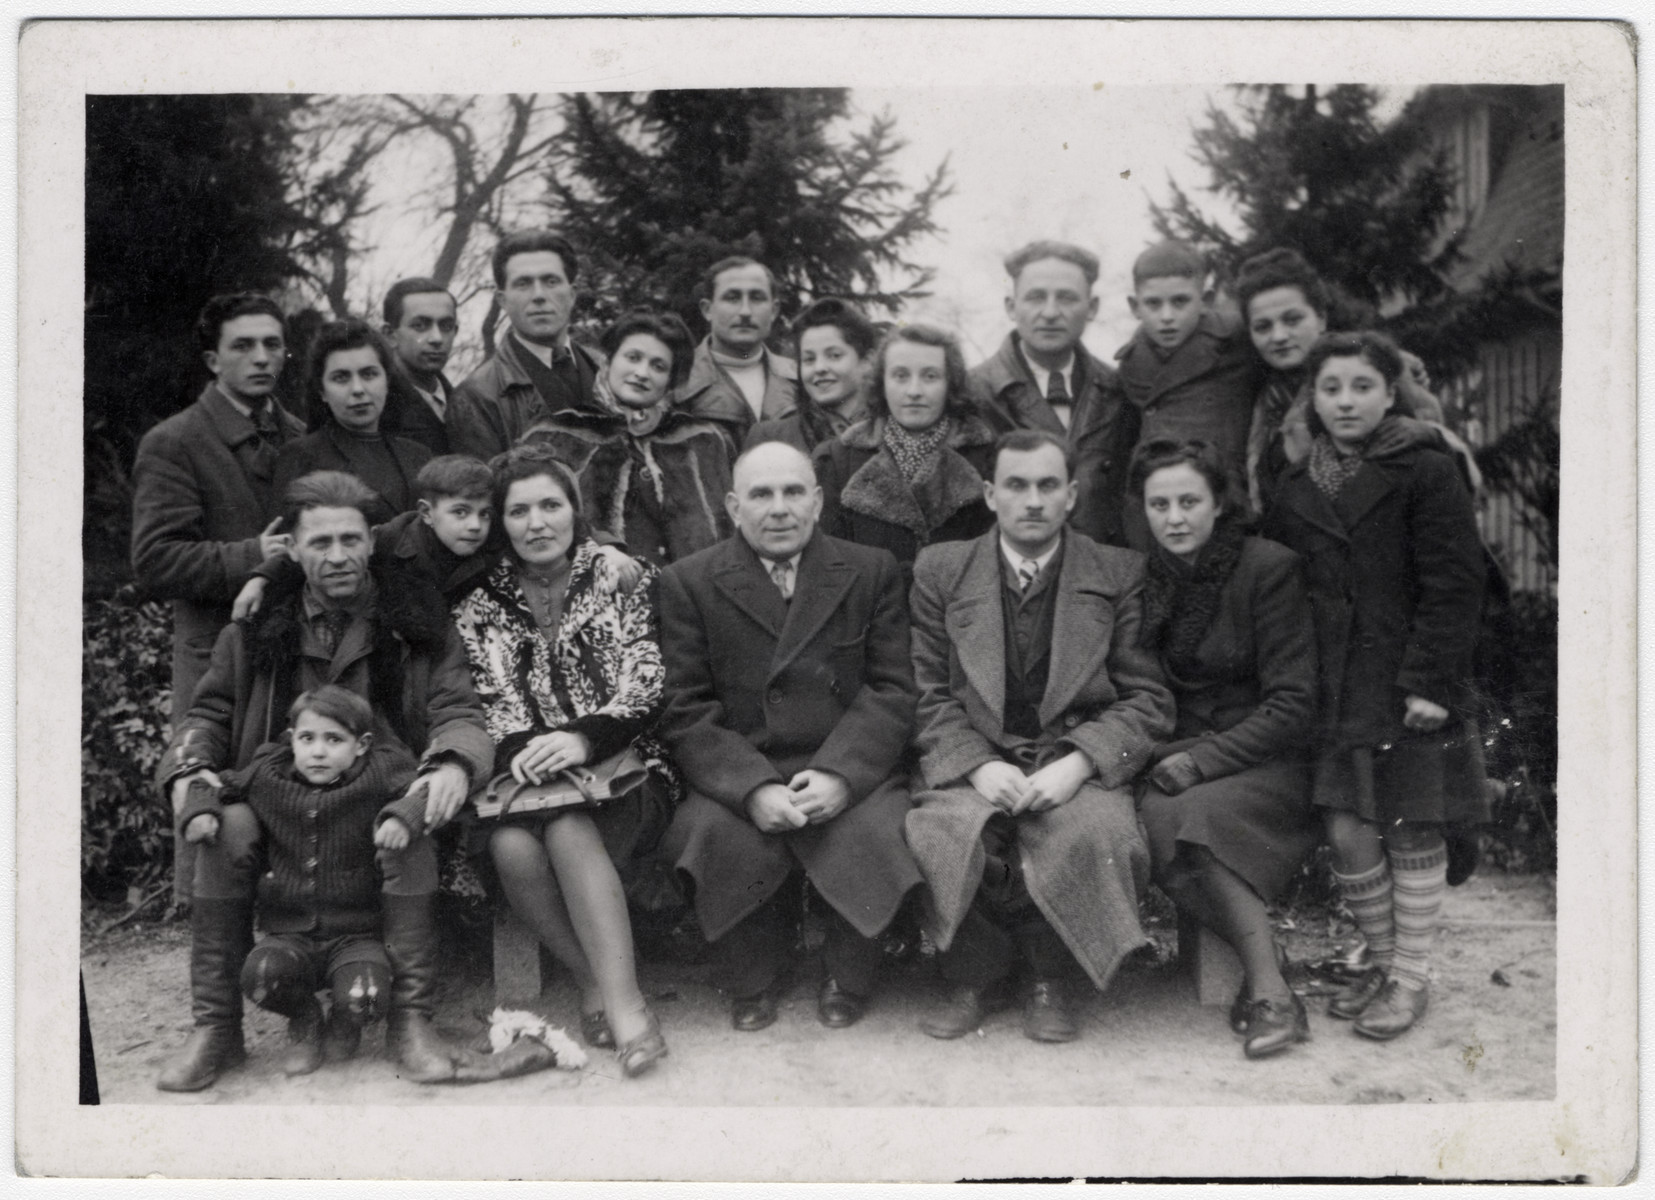 Group portrait of Jewish survivors from Zhetel who had fought with the Lenin Brigade, taken shortly after liberation.

Pictured (bottom row, left to right) are Shlanke Minuskin, Kalman Minuskin, Henikel Minuskin, Shanke Minuskin Moishe Mendel, Arul and his wife.  Among those standing are Zavul Mordkowski and Sonia Mordkowski.